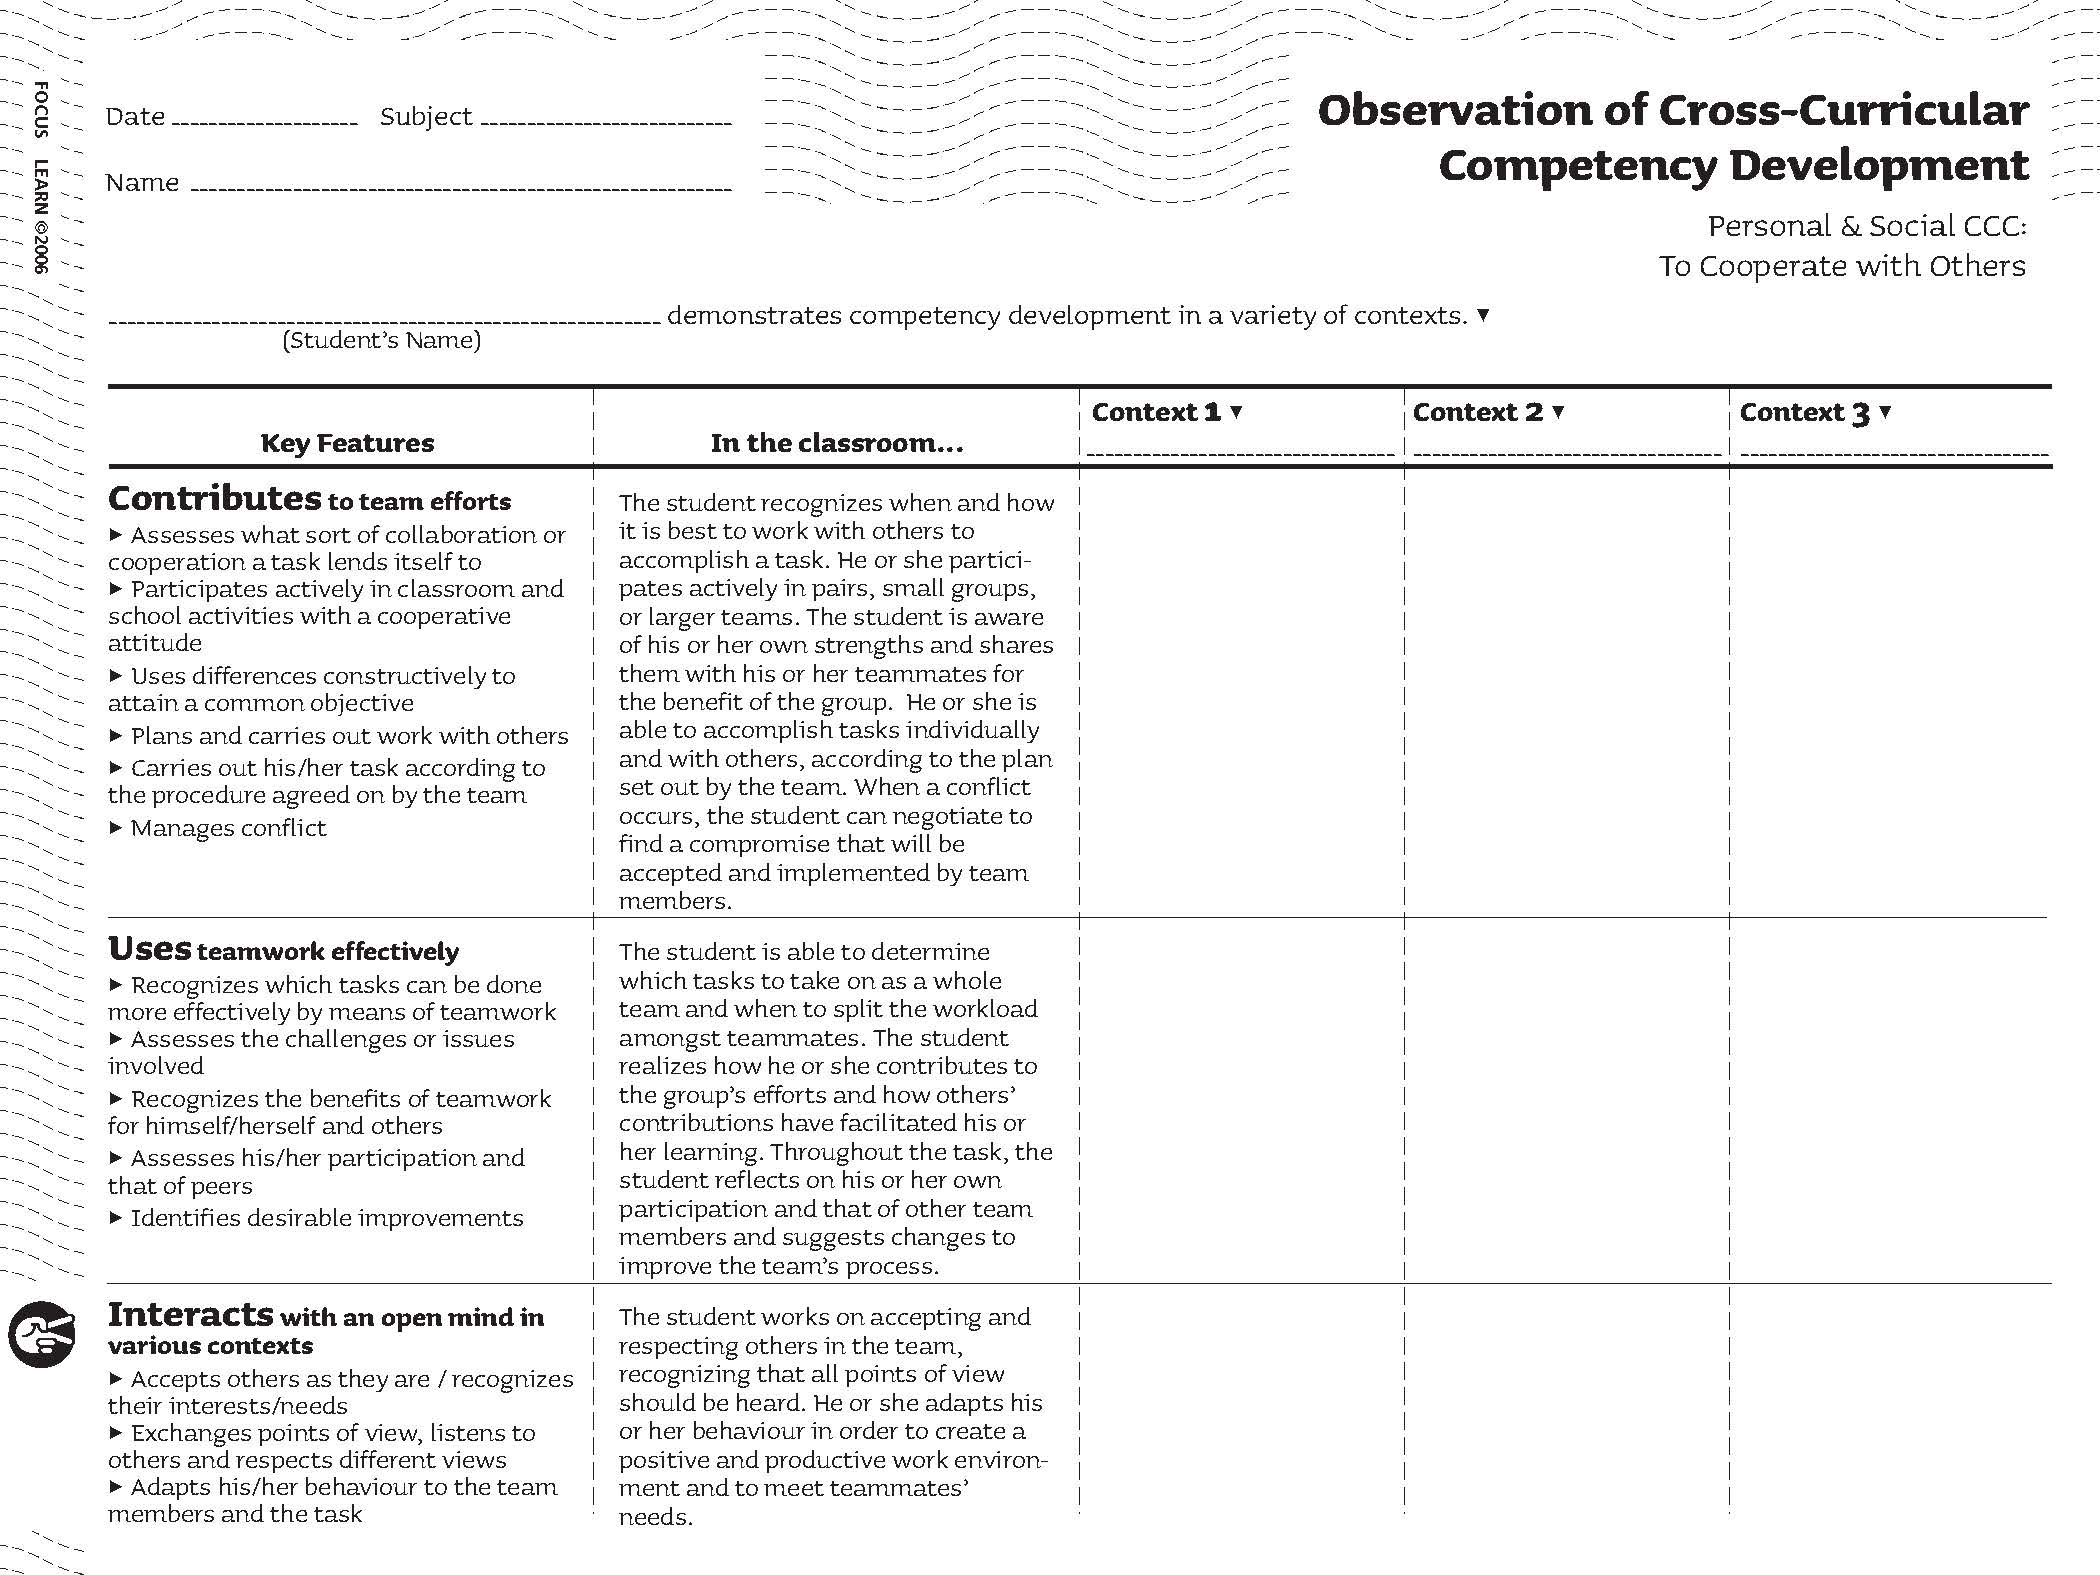 Observation of Cross-Curricular Competency Development